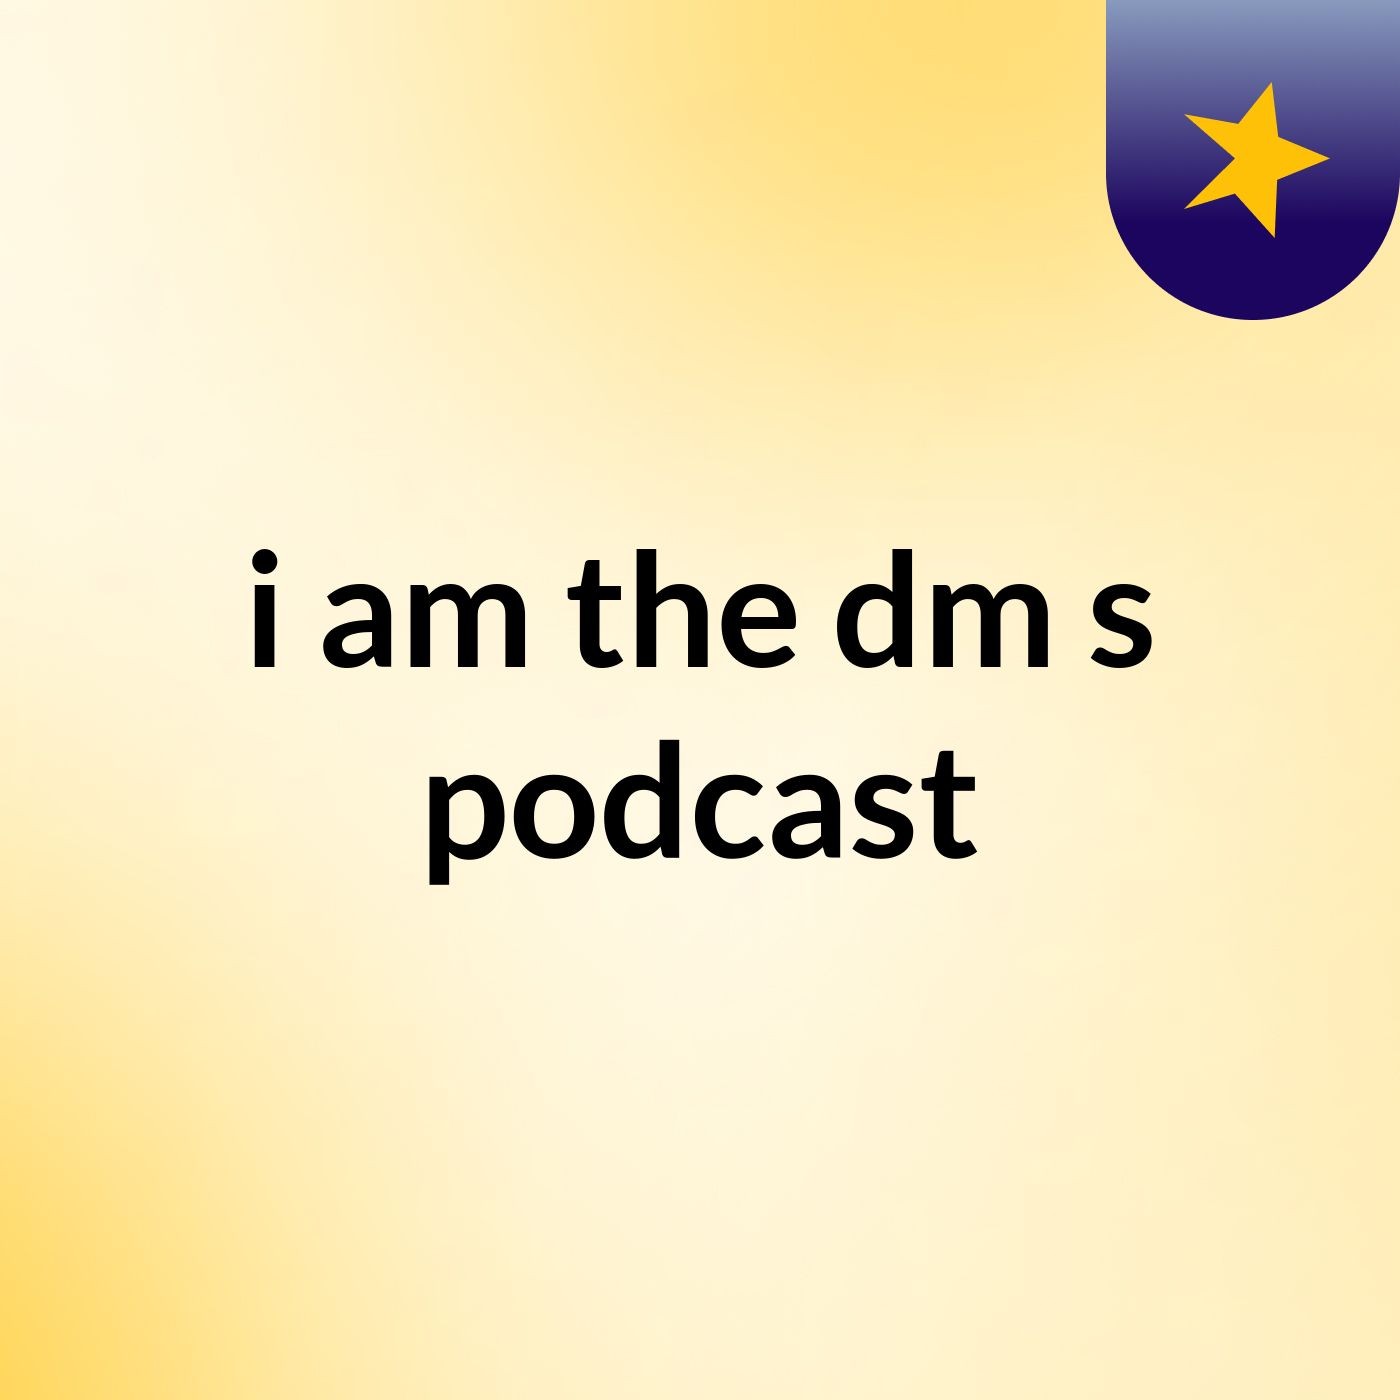 i am the dm's podcast